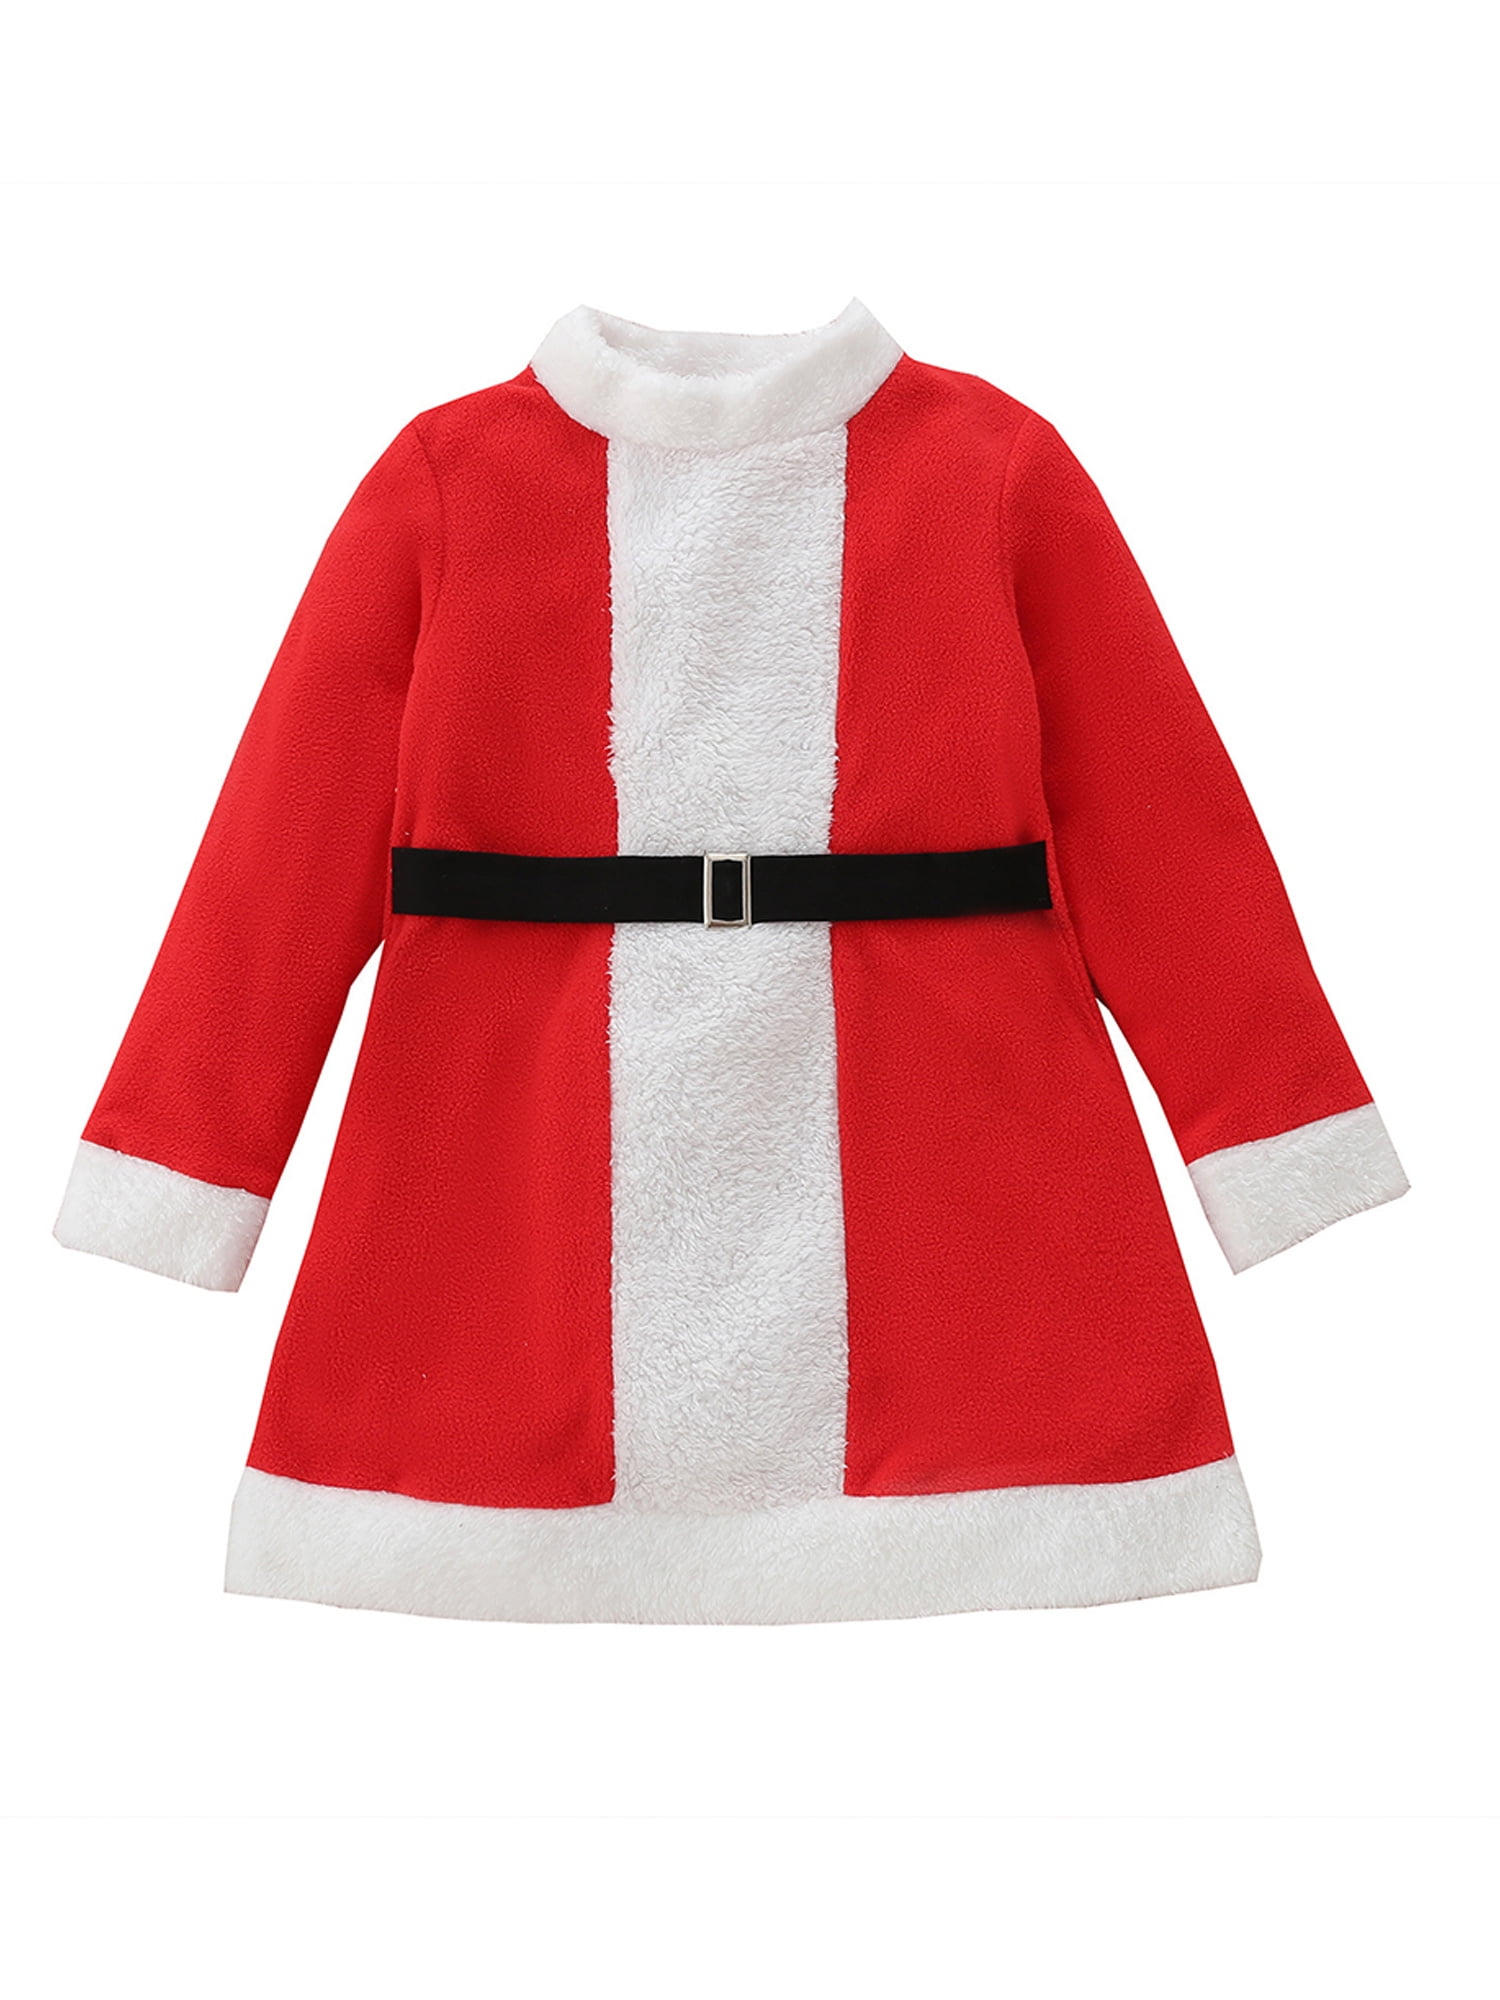 Baby Boys Girls Christmas Santa Claus Party Xmas Clothes Outfit Kids Fancy Dress 